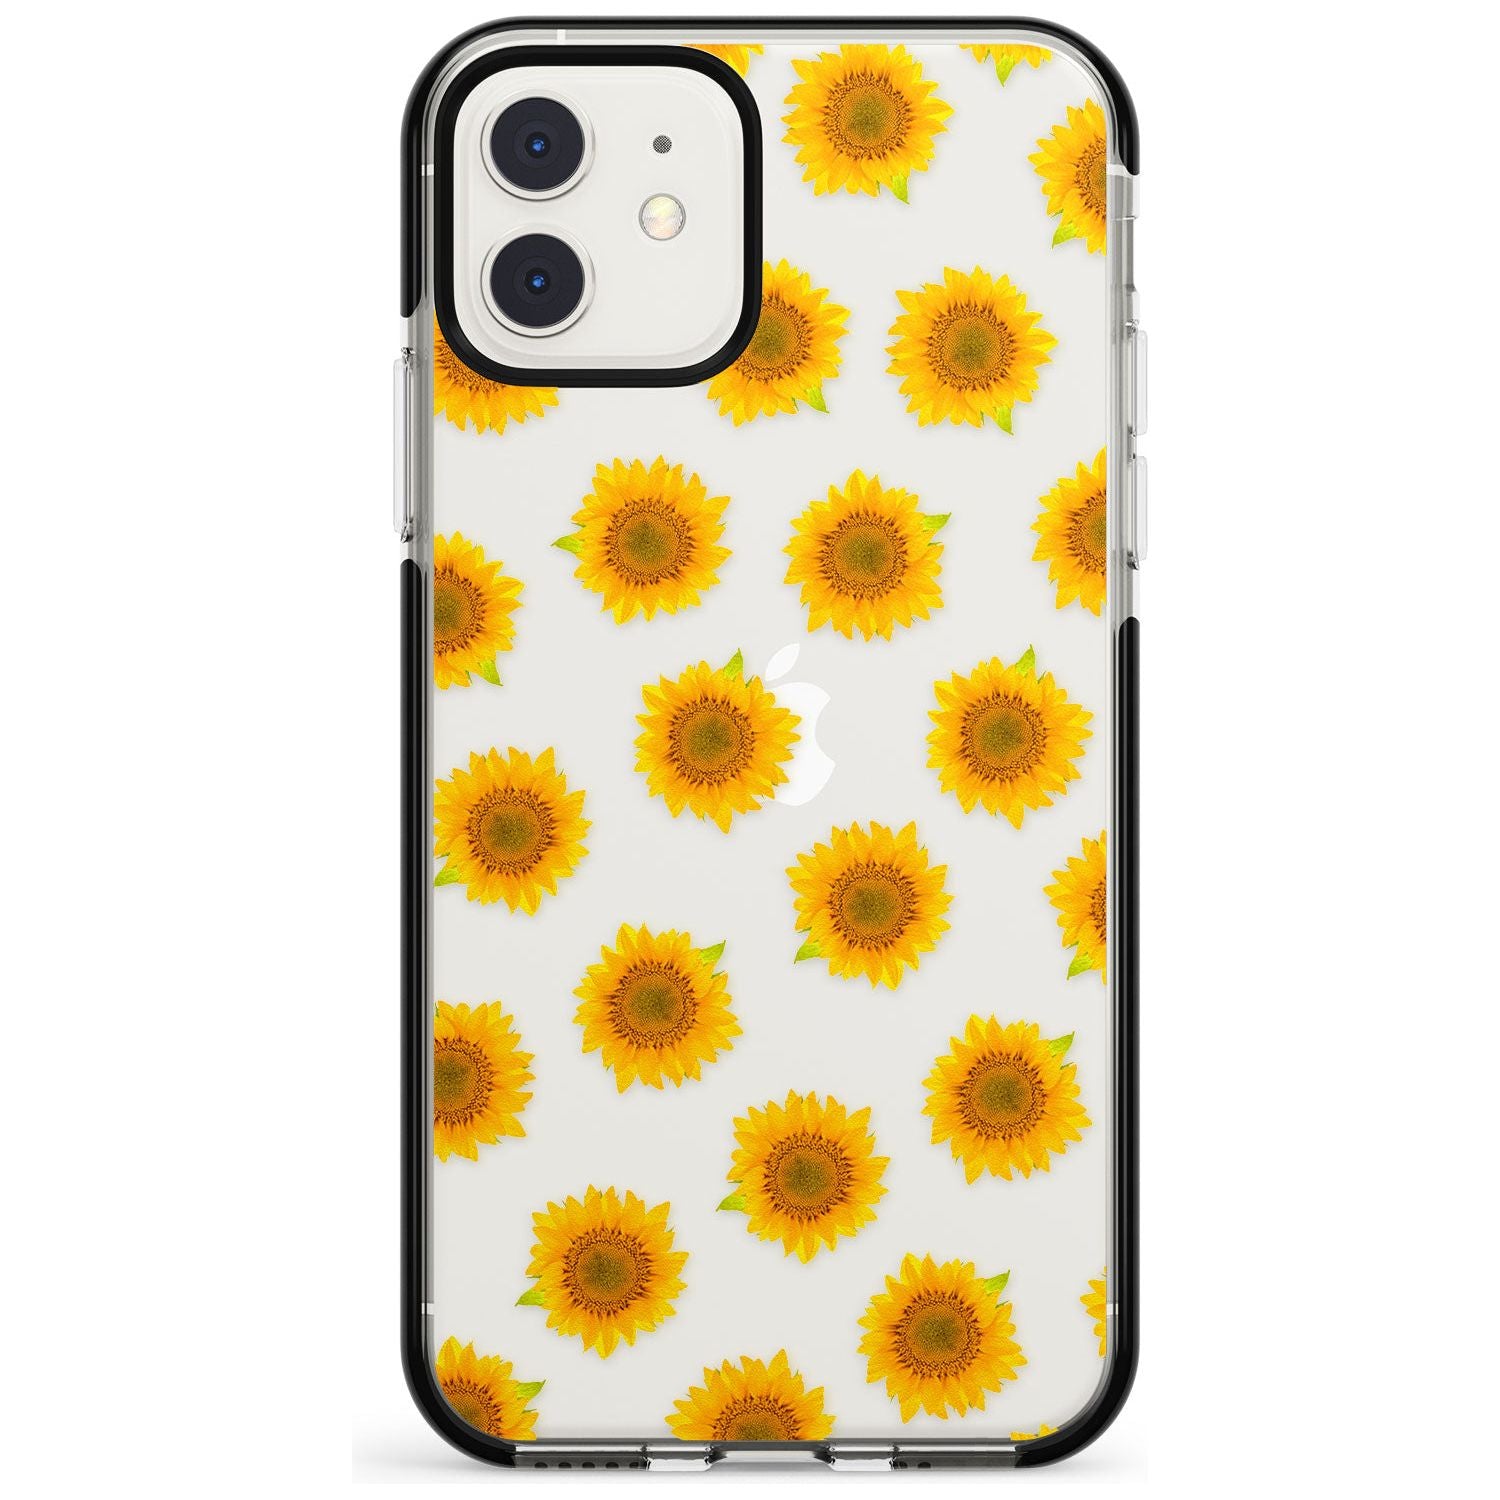 Sunflowers Transparent Pattern Black Impact Phone Case for iPhone 11